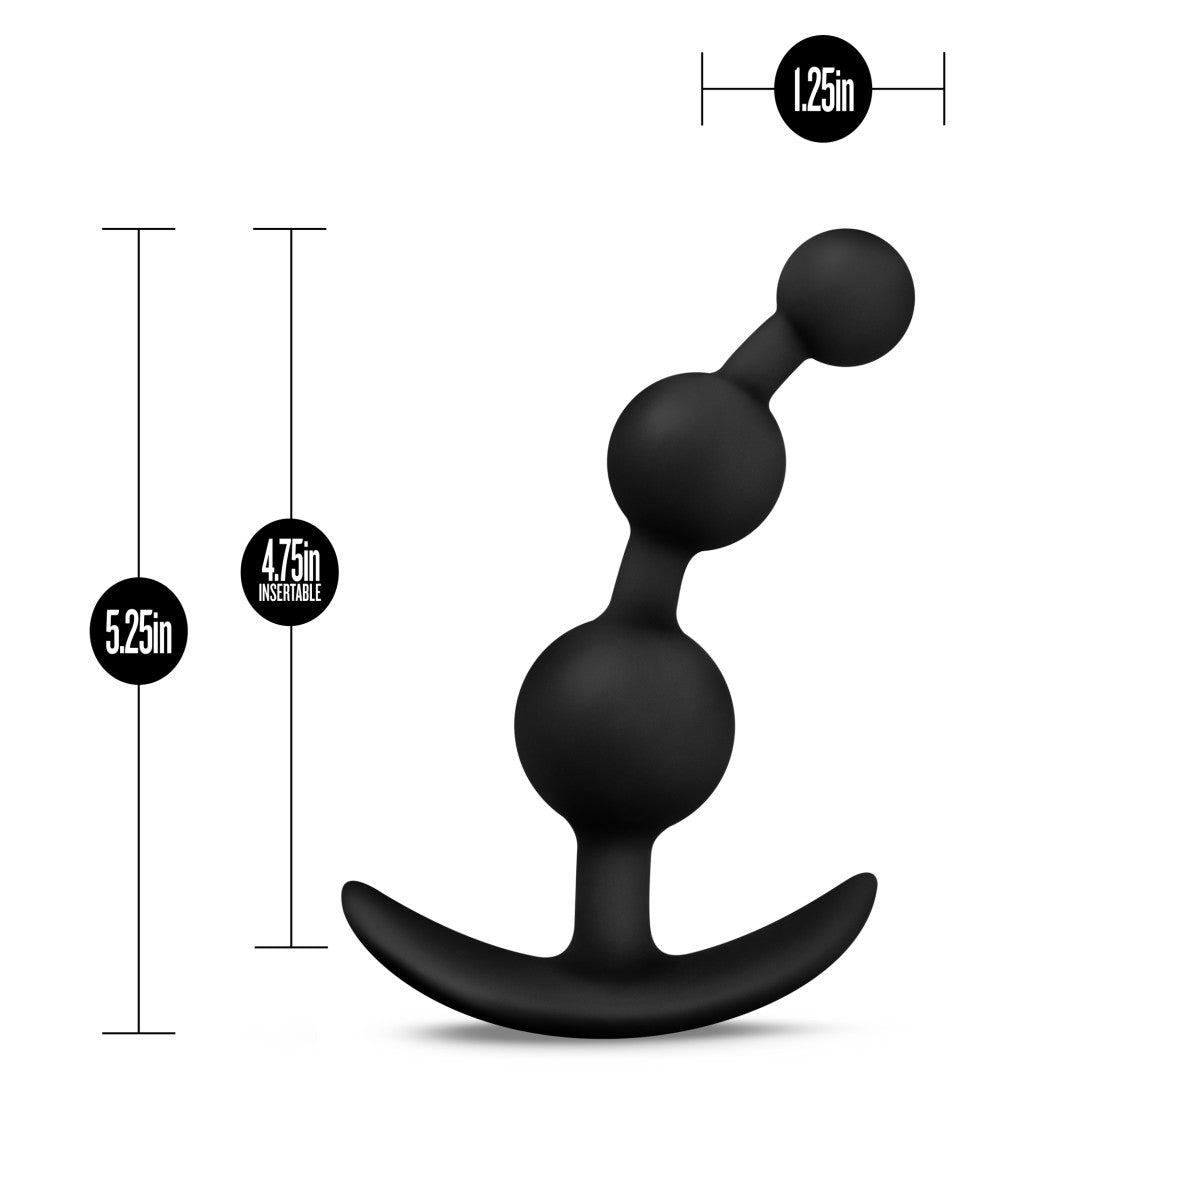 Black beaded flexible silicone butt plug with three progressively sized beads, starting with a small bead at the top, a medium bead in the middle, and a larger bead at the bottom. Features slim silicone necks between each bead and a slim flared base for safety and comfort. Additional images show alternate angles.